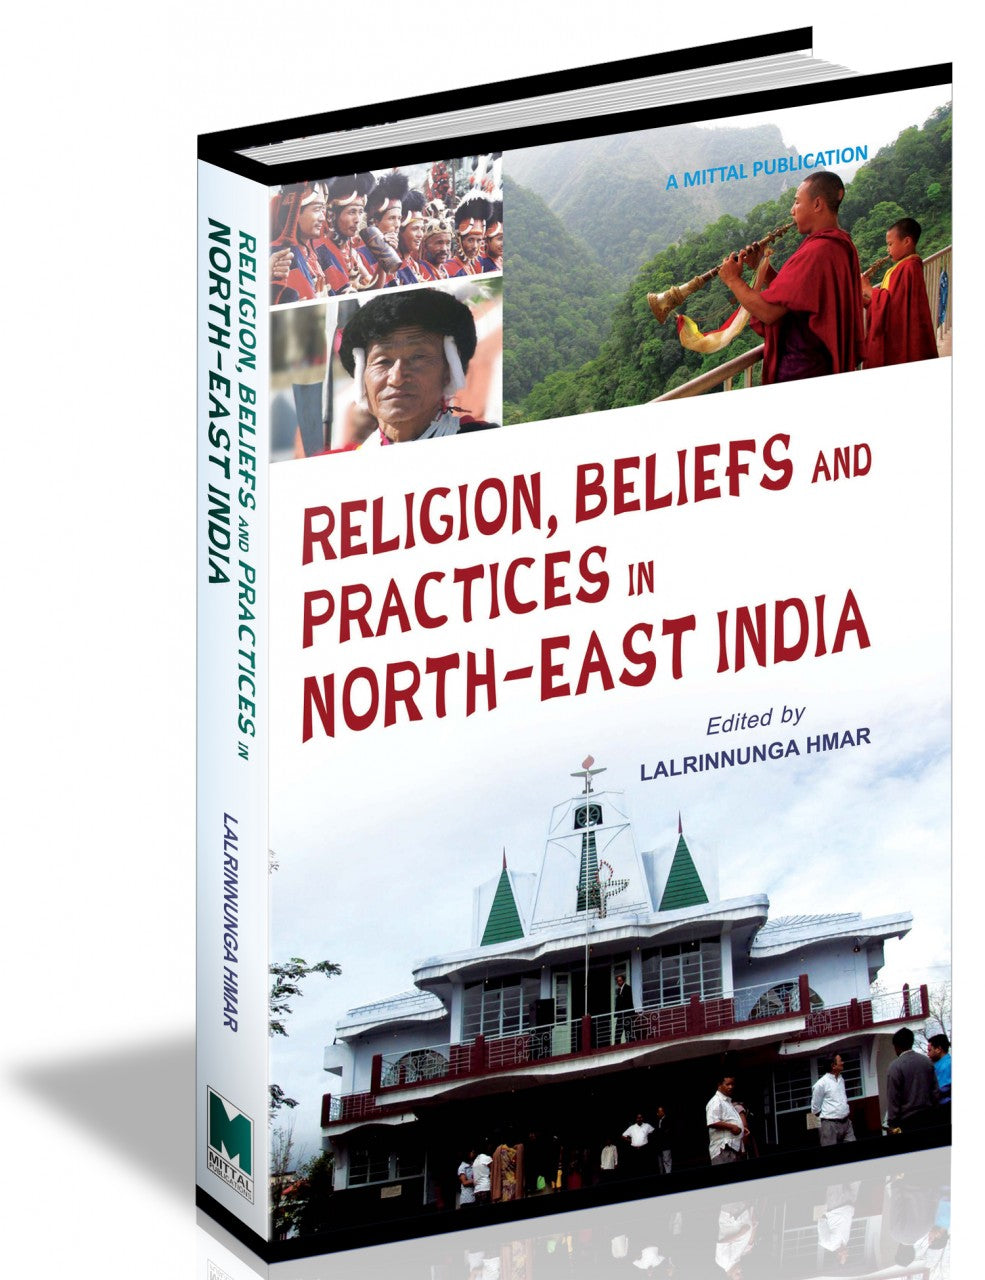 Religion, Beliefs and Practices in North-East India